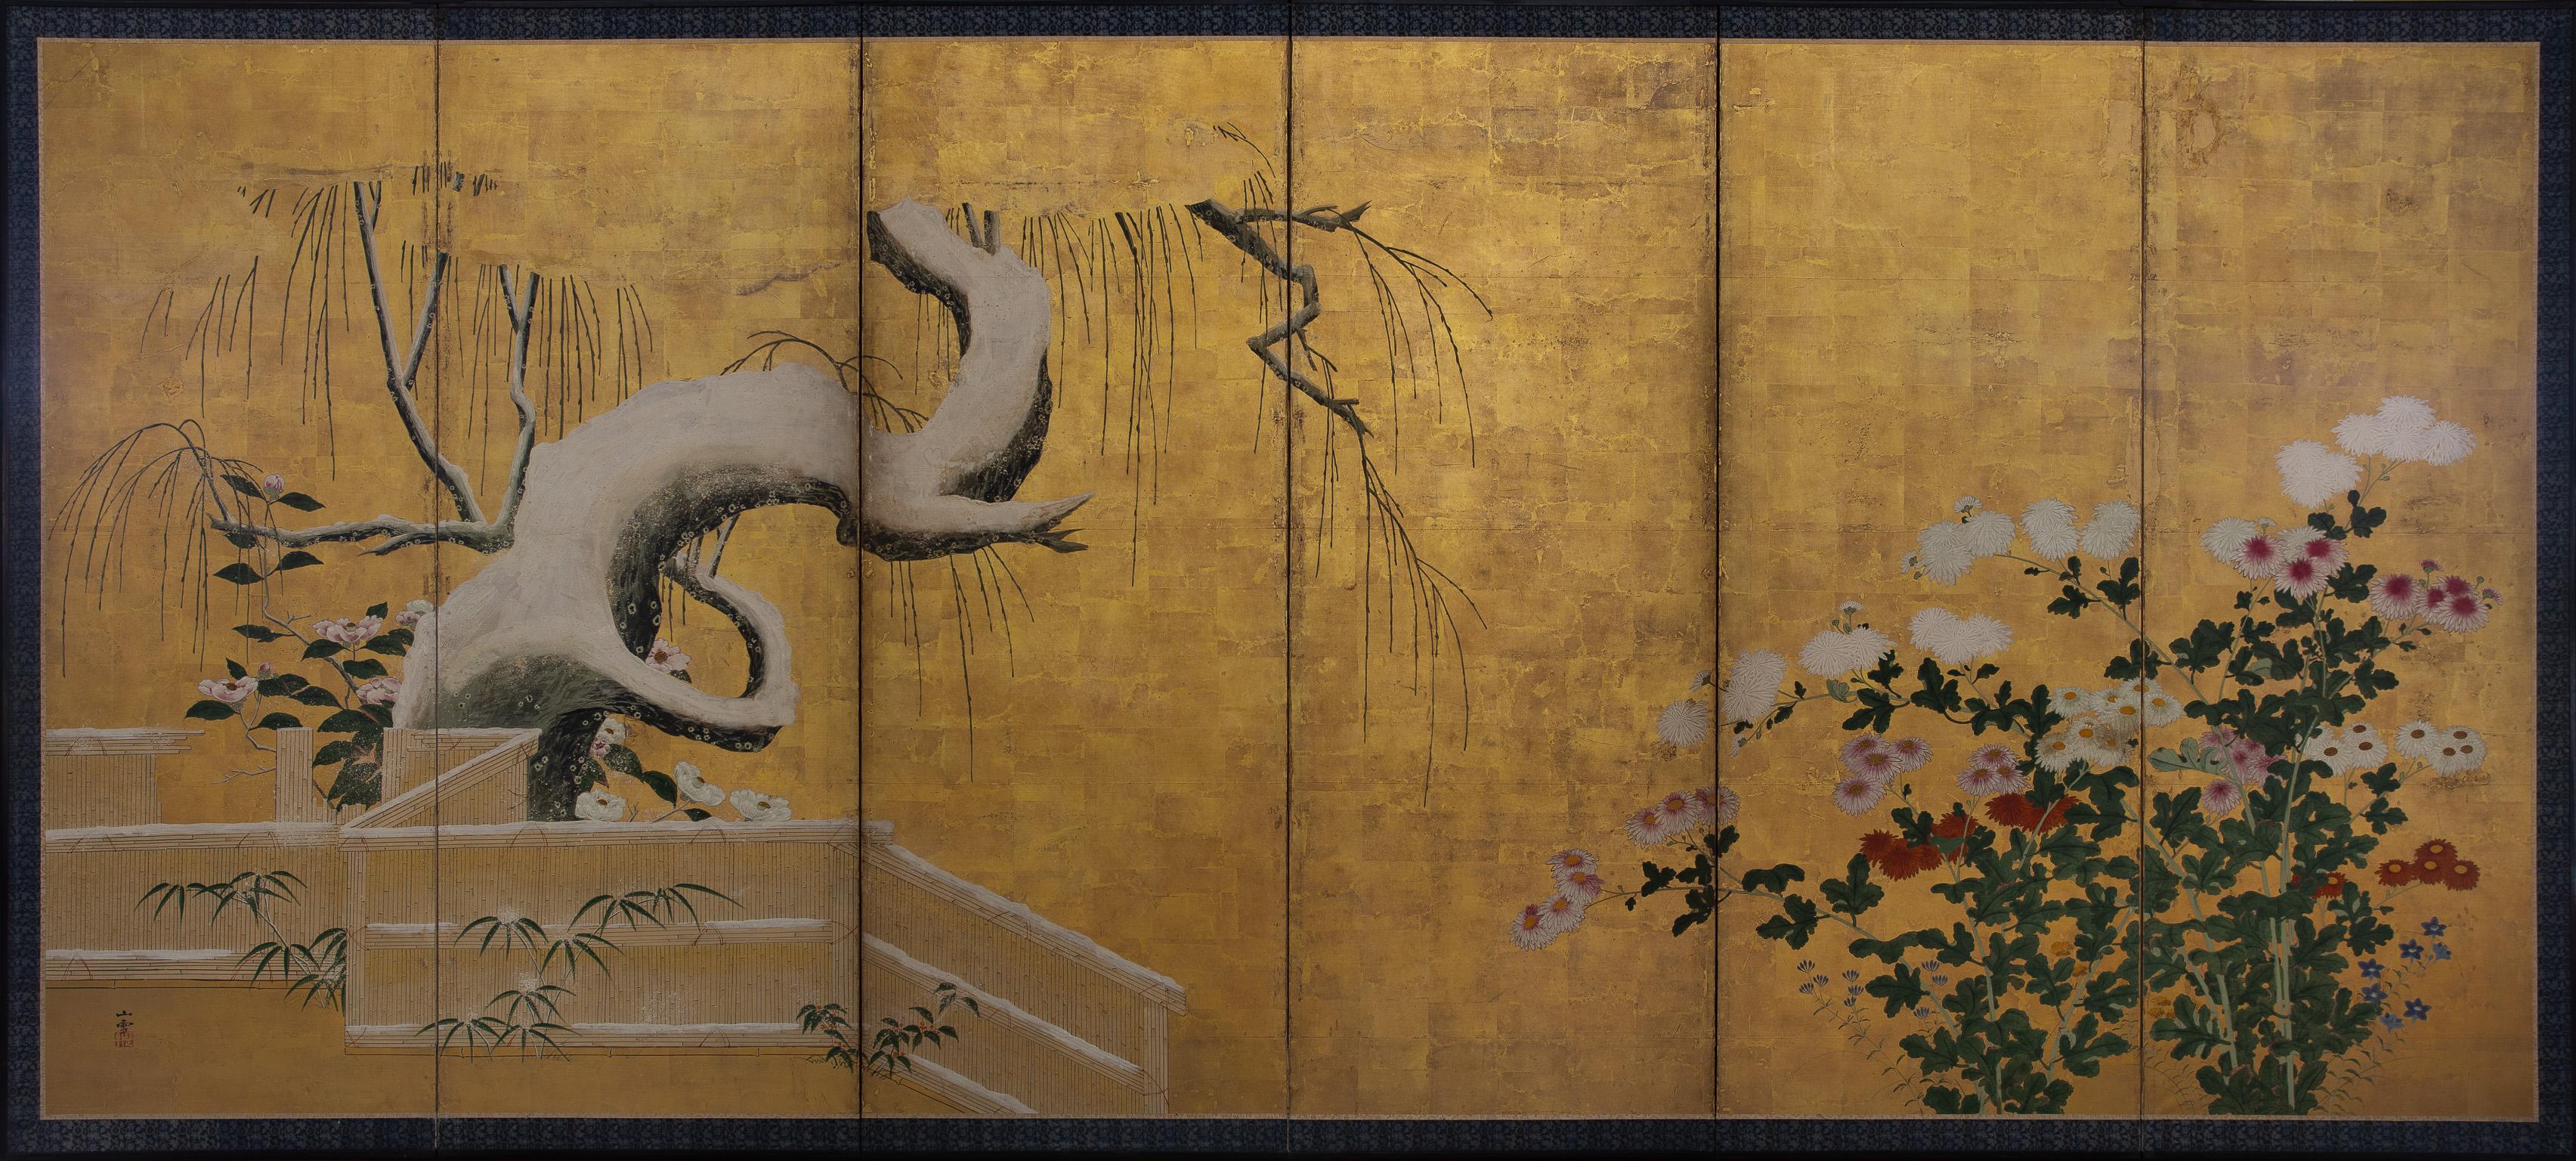 Flowers and Trees of the Four Seasons
A pair of six-panel folding screens; ink, color, gofun and gold leaf on paper
Kyoto Kano (Kyo-Kano) School

Attributed to Kano Sansetsu (1590-1651)

Signature: Sansetsu

Seal: Jasokuken

Each 170 by